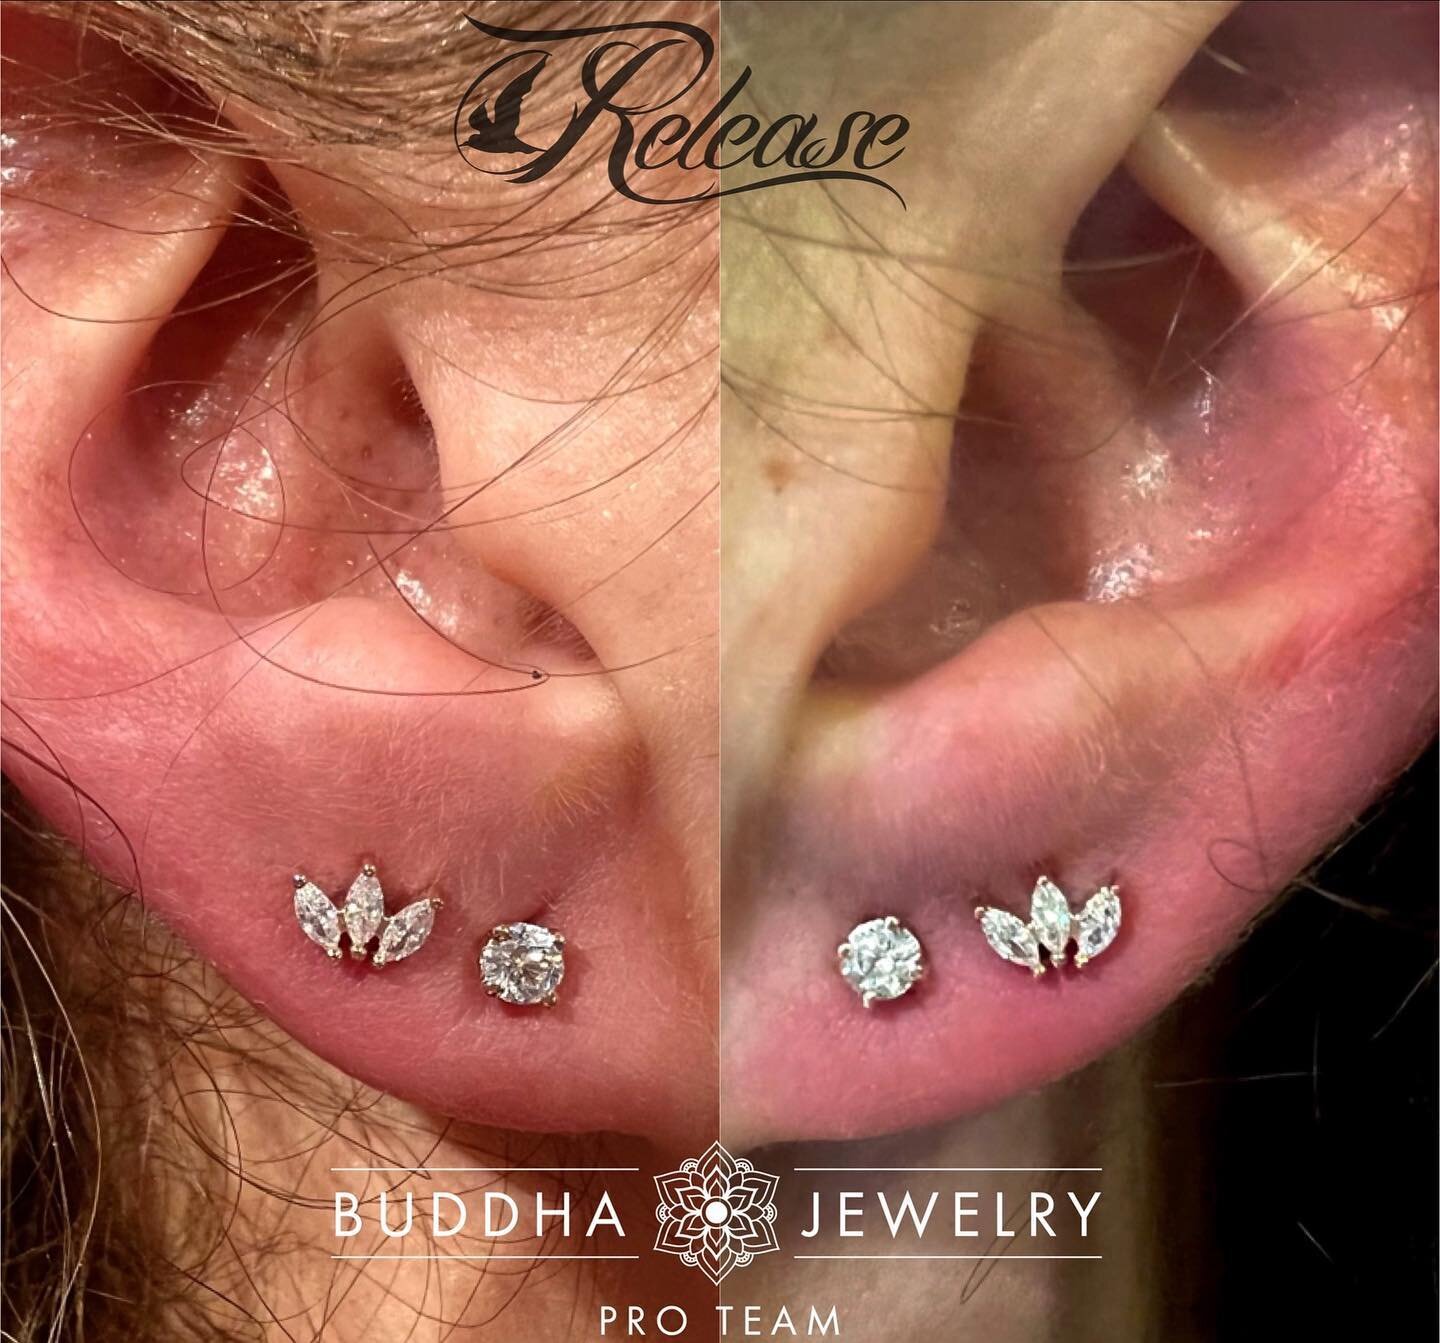 Don&rsquo;t forget that every Tuesday we offer Buy one, get one free on piercing fees! 
Here&rsquo;s one from earlier today where our client took advantage of that deal not once, but twice, getting 4 piercings total, waiving 2 piercing fees and decki